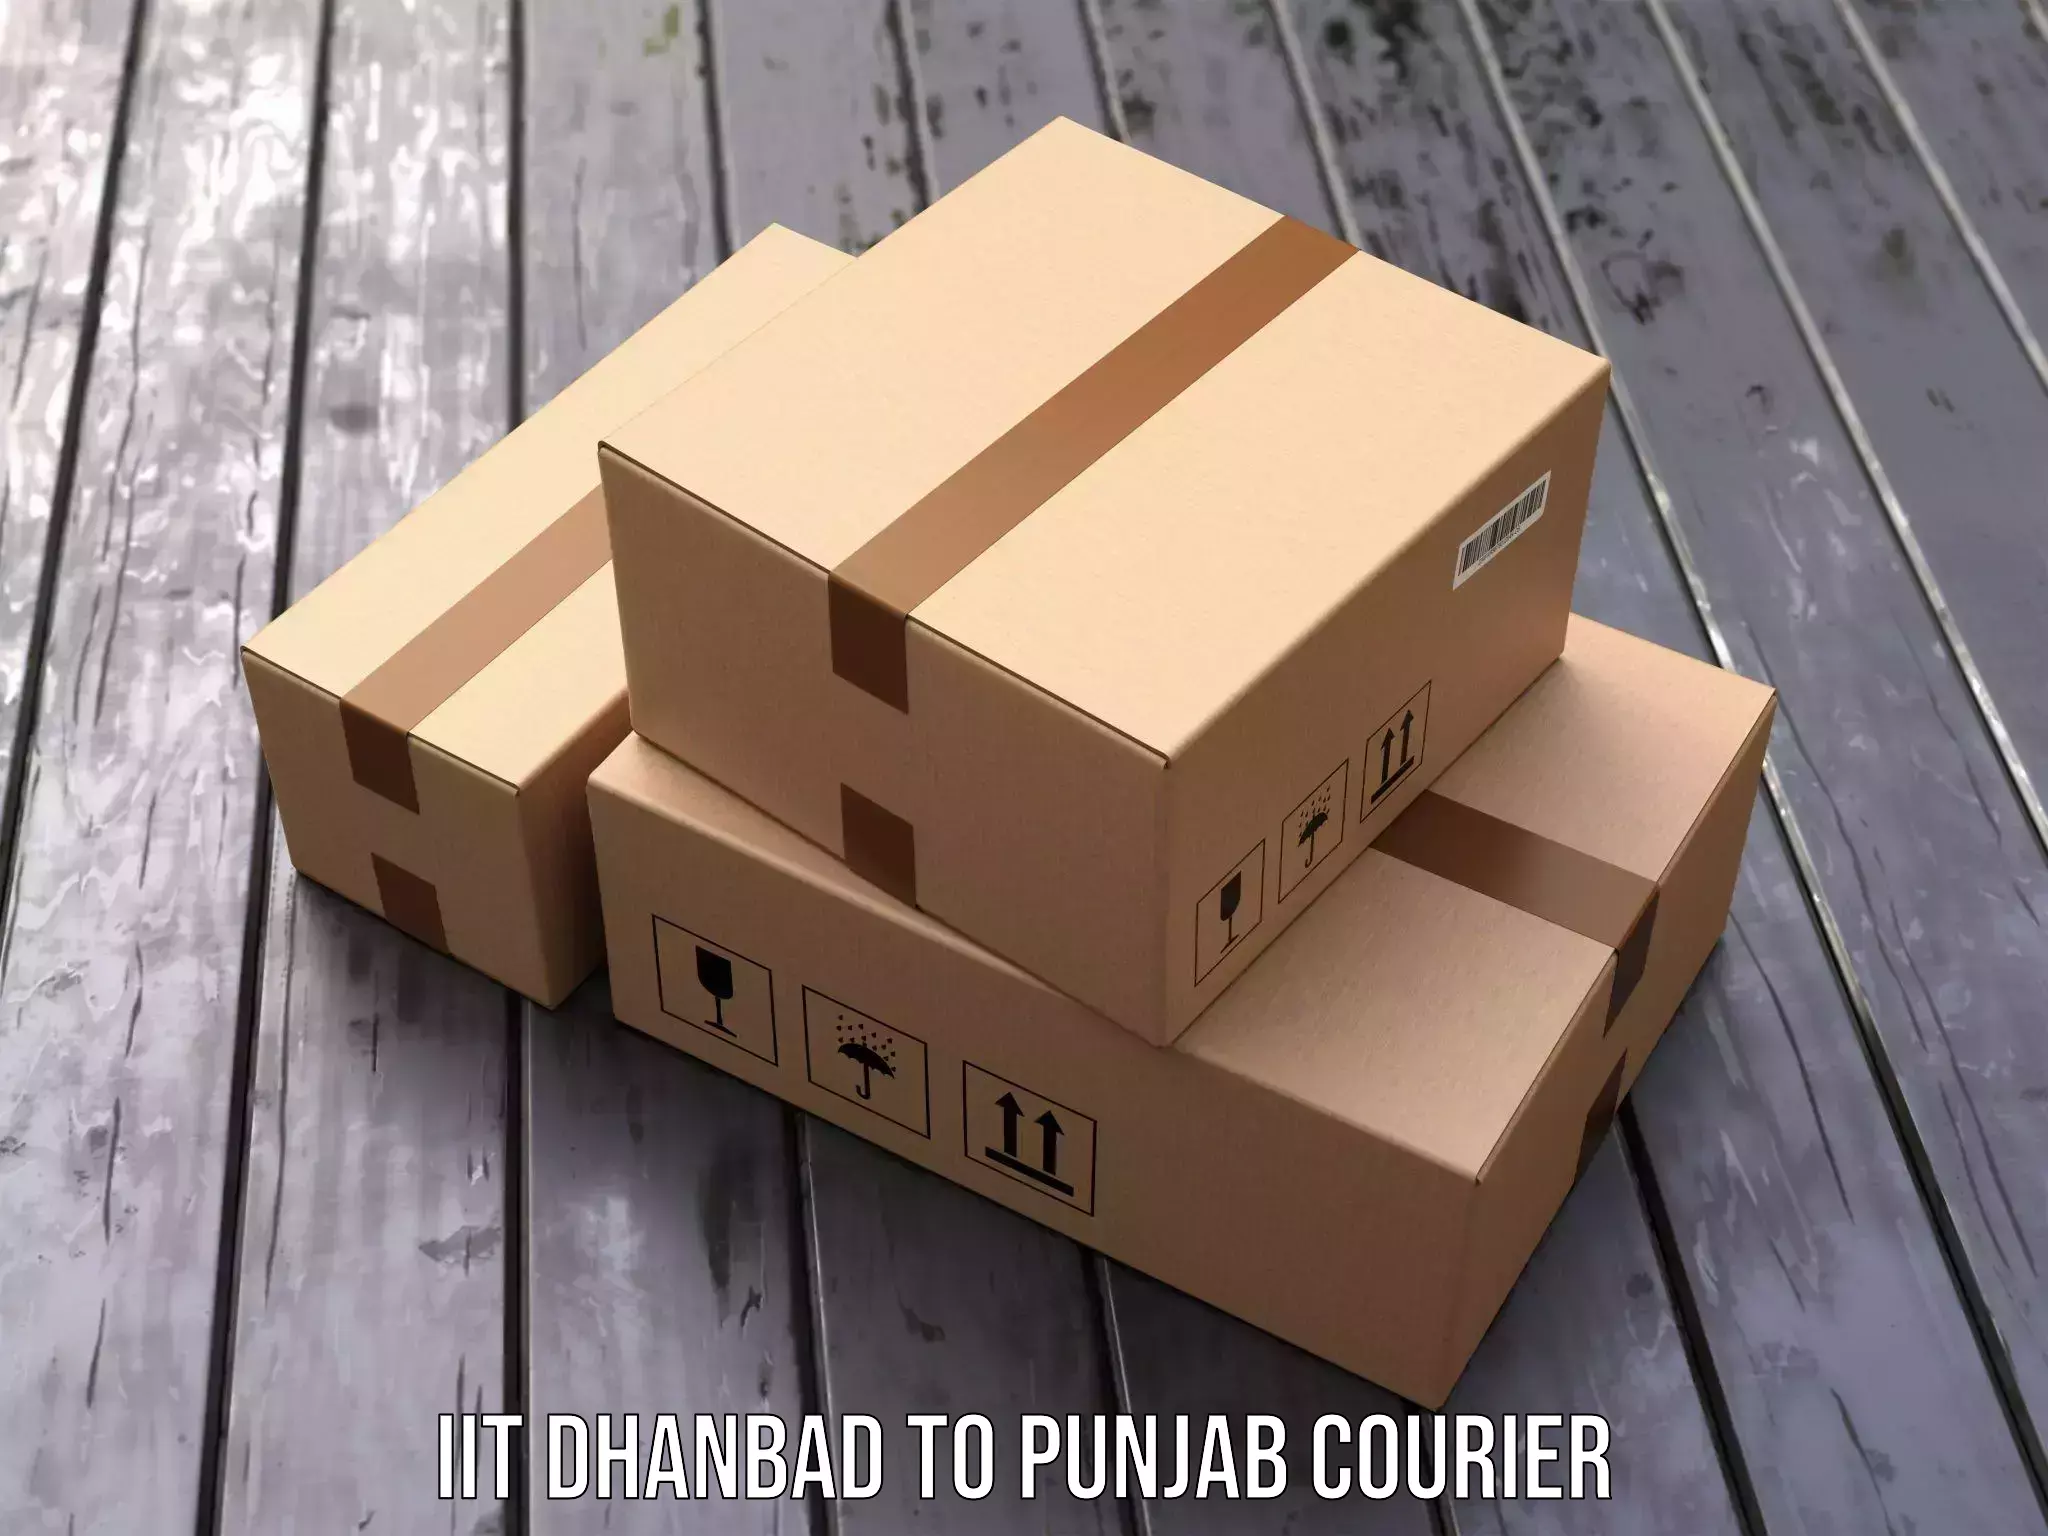 State-of-the-art courier technology IIT Dhanbad to Ludhiana